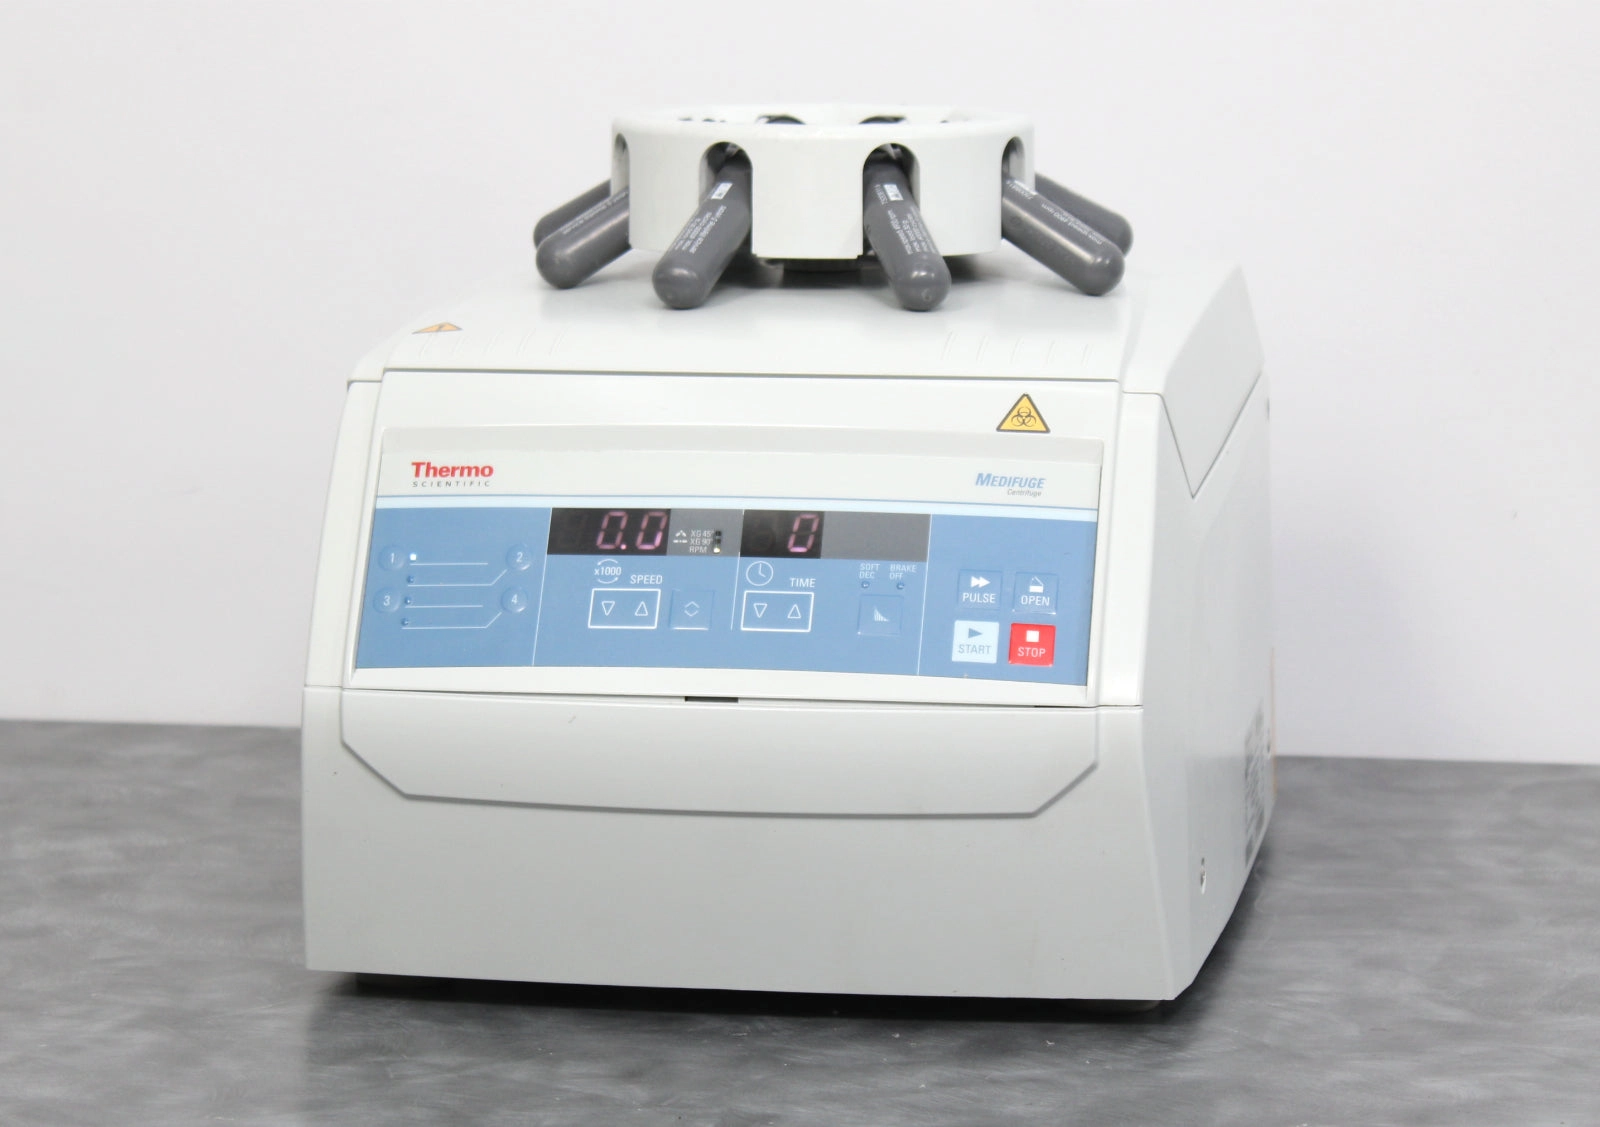 Thermo Scientific Medifuge Benchtop Centrifuge 75008801 with DualSpin Rotor